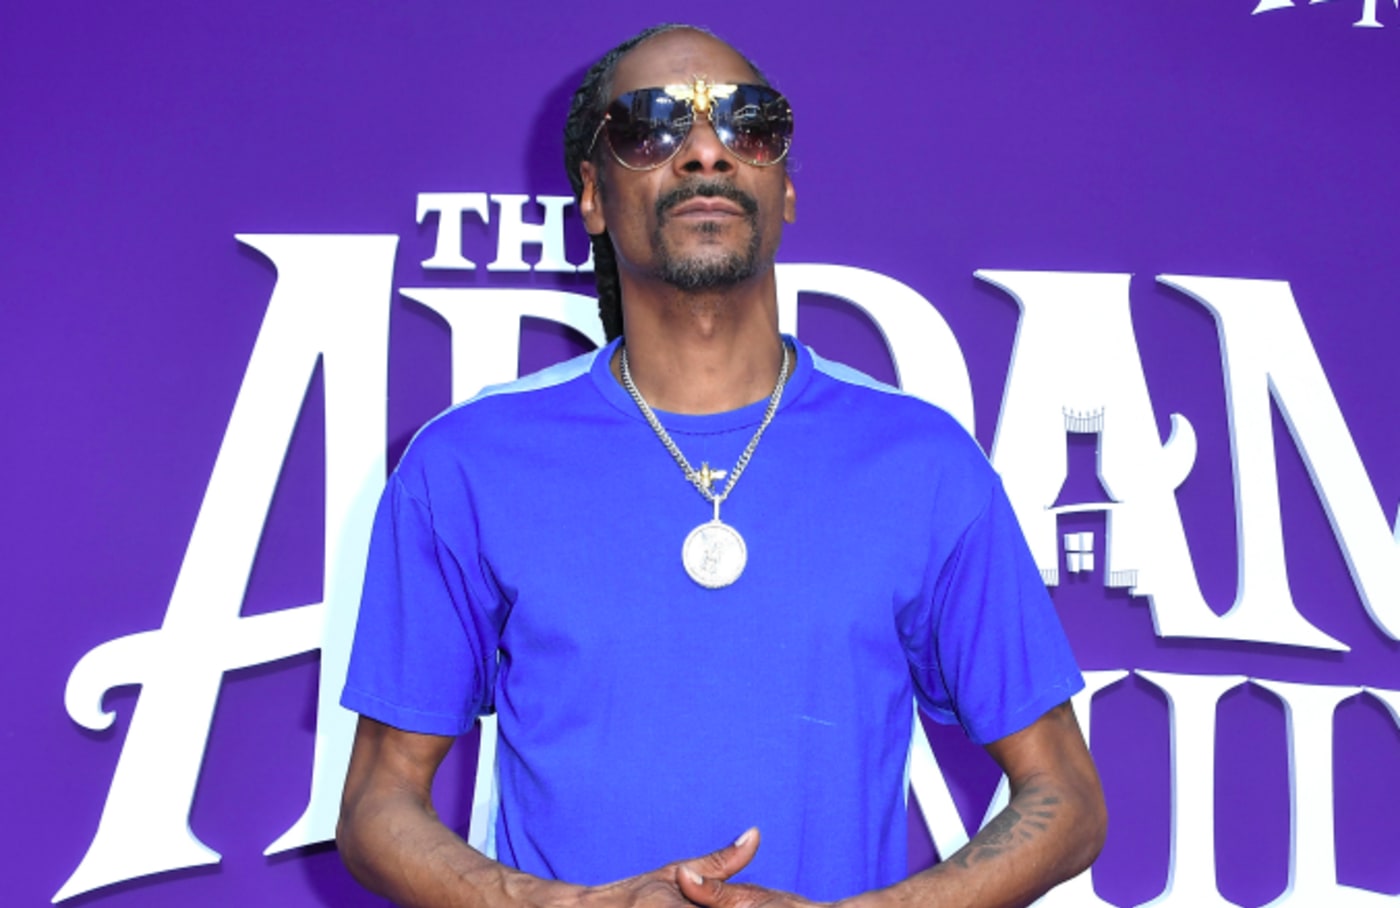 Snoop Dogg arrives at the Premiere Of MGM's "The Addams Family"